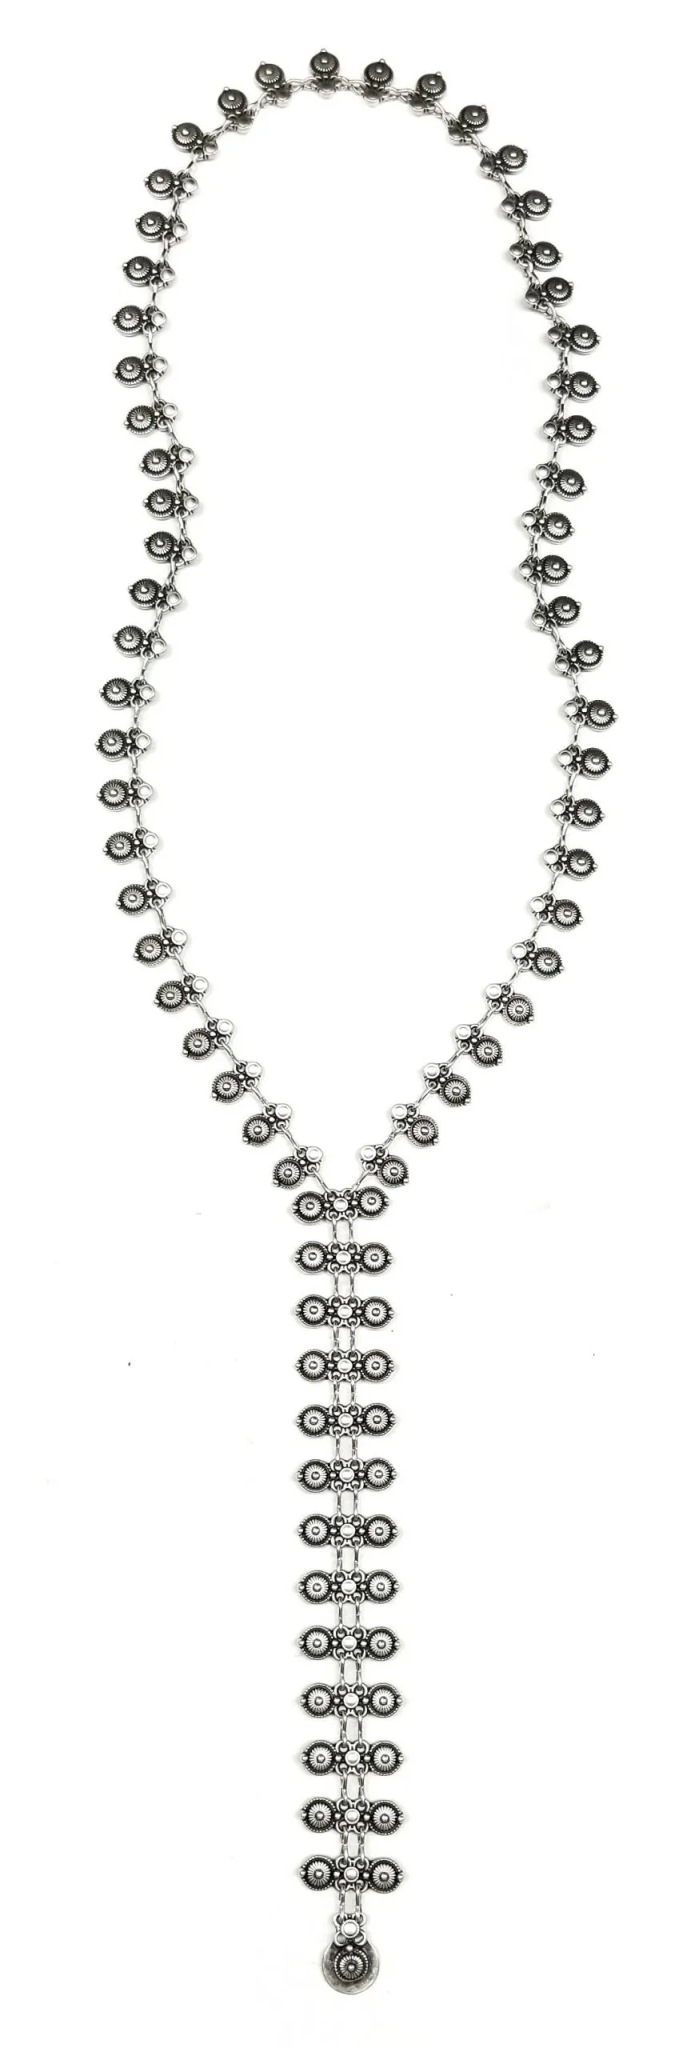 Pewter Couture SLVR1088 Pewter Necklace